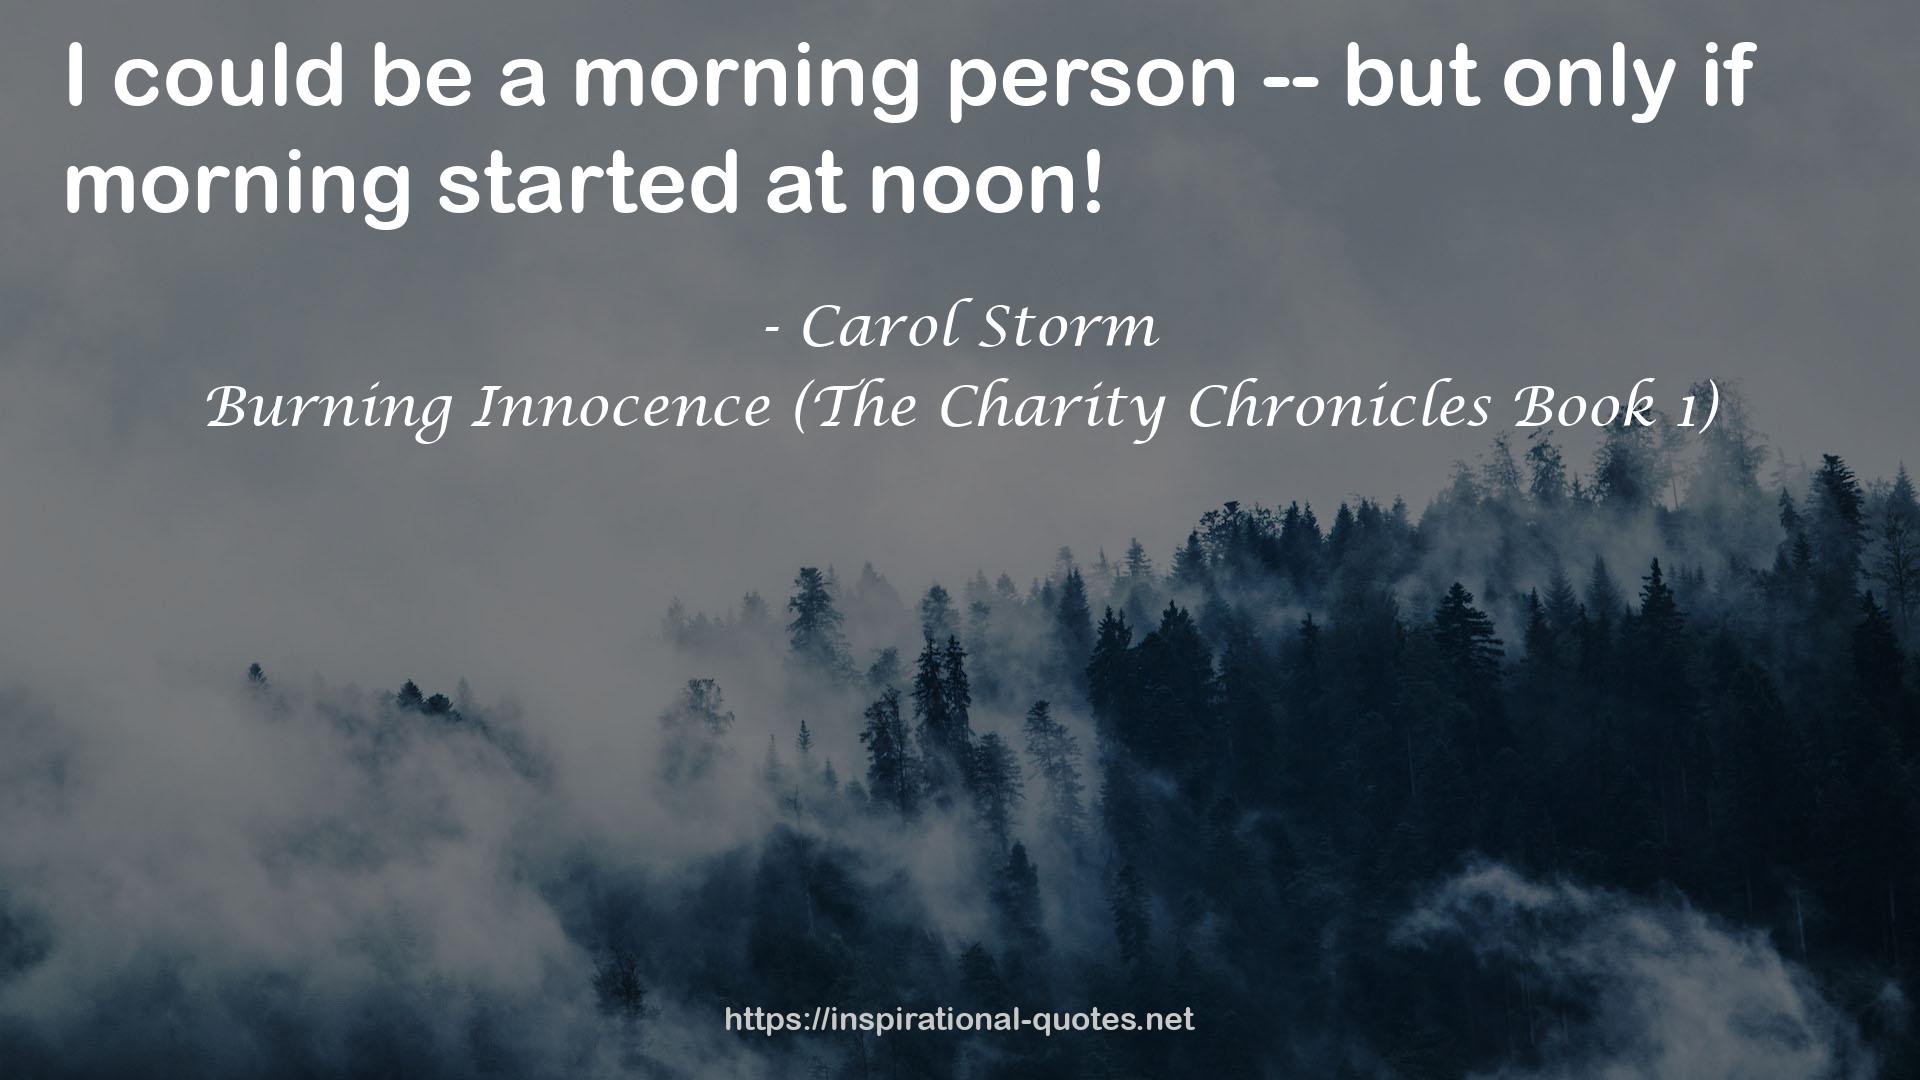 Burning Innocence (The Charity Chronicles Book 1) QUOTES